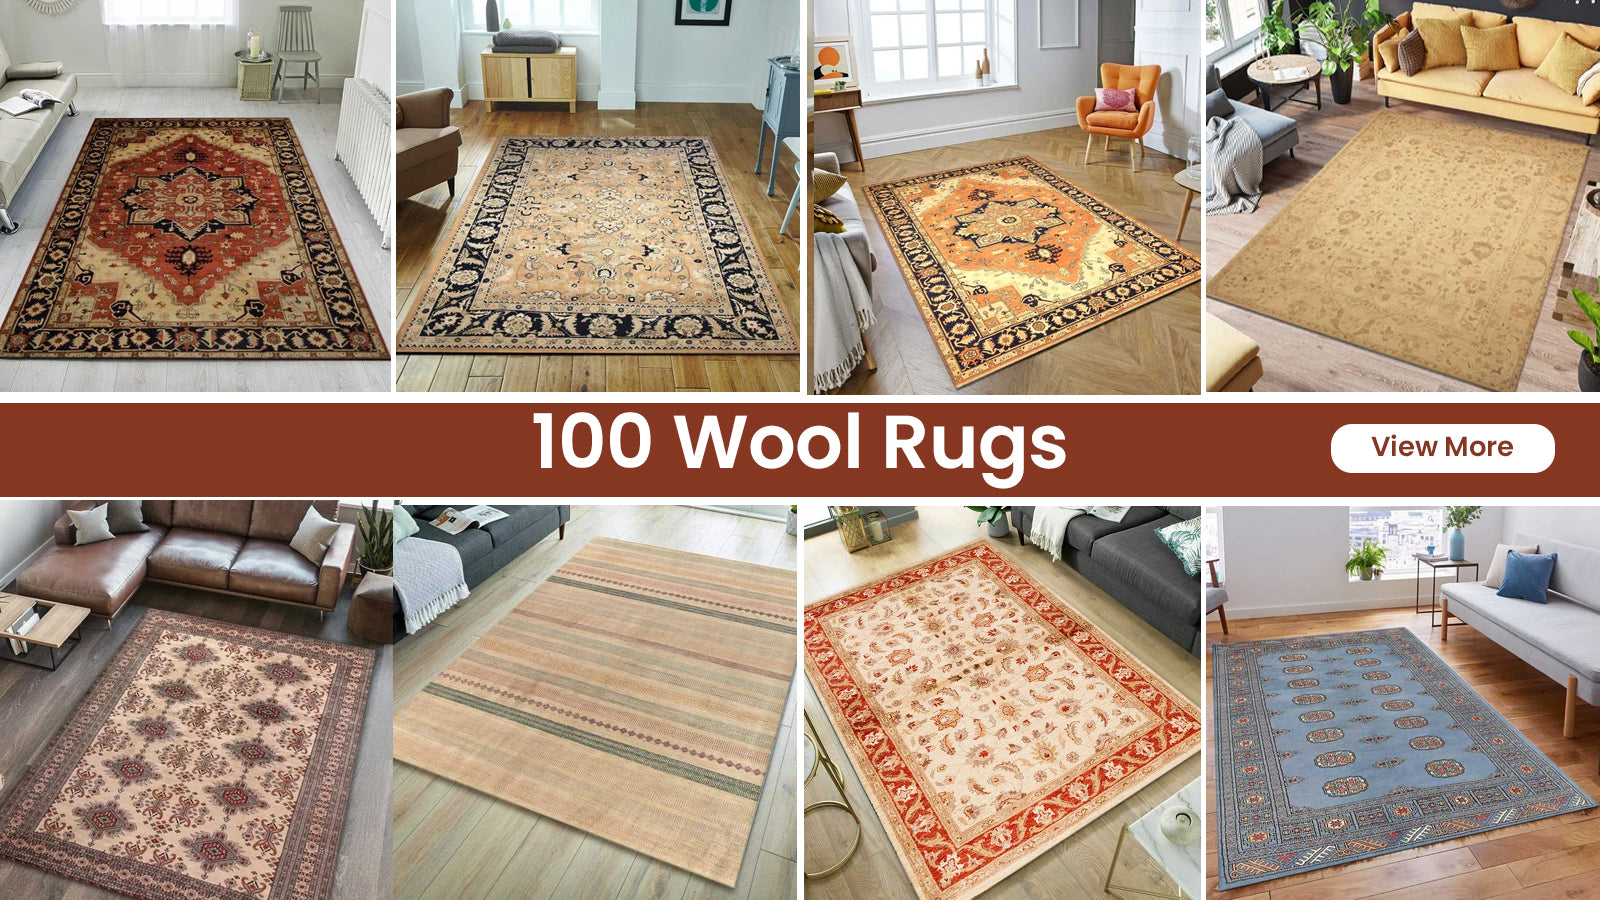 https://www.rugknots.com/cdn/shop/articles/Top_3_Problems_With_Wool_Rugs_And_How_To_Avoid_Them.jpg?v=1683889181